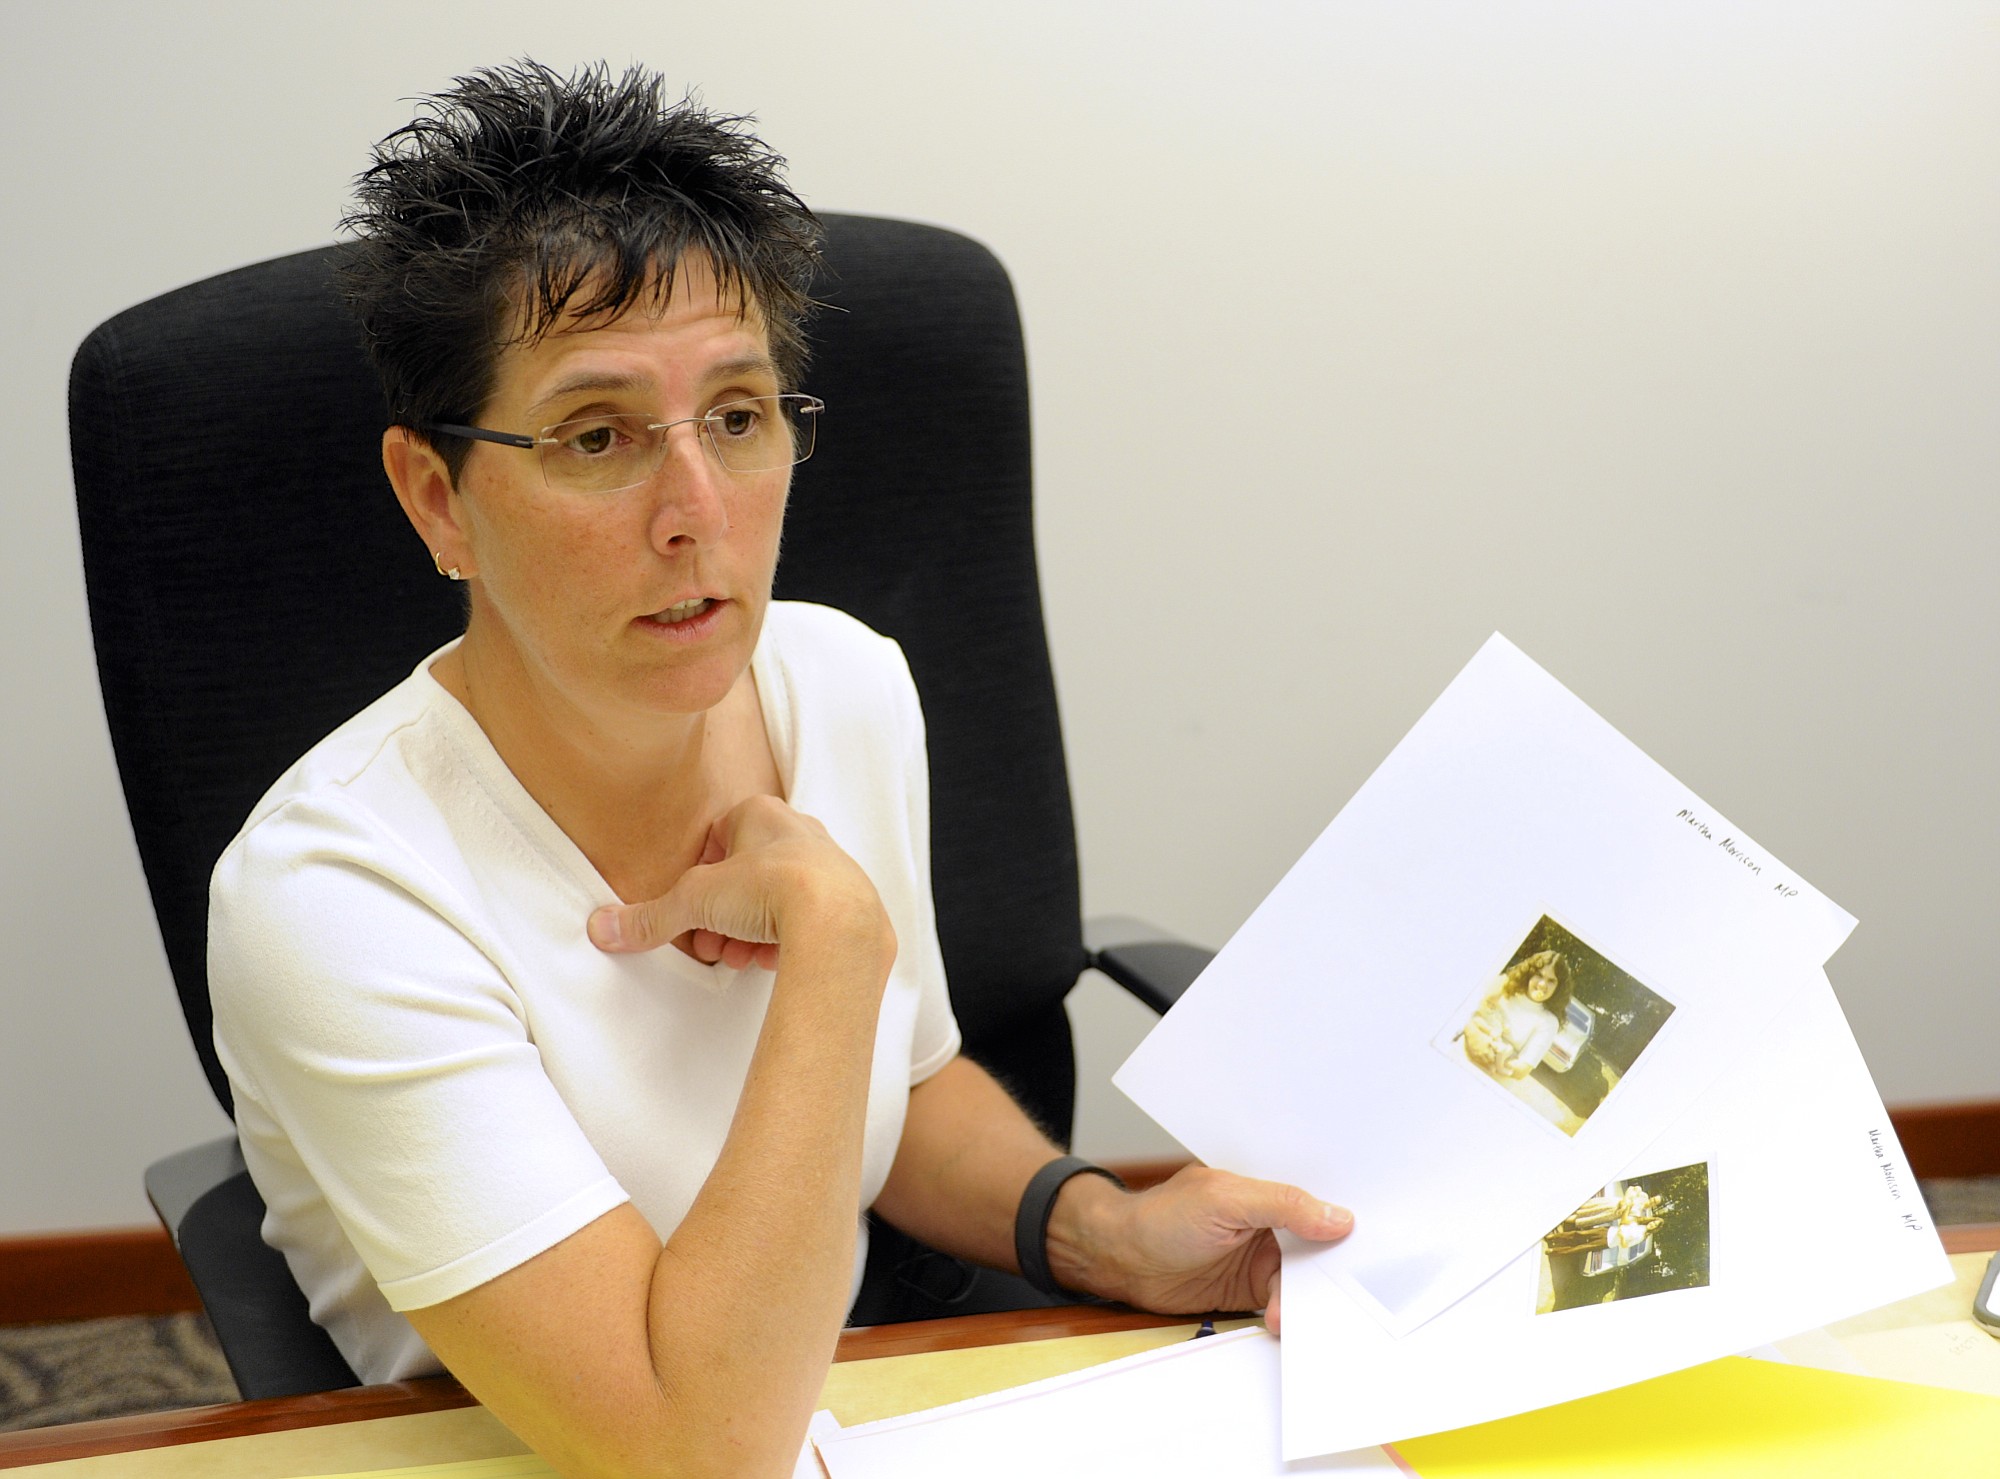 Nikki Costa, the operations manager at the Clark County Office of the Medical Examiner, detailed eight years worth of work it took to identify remains found in October 1974.